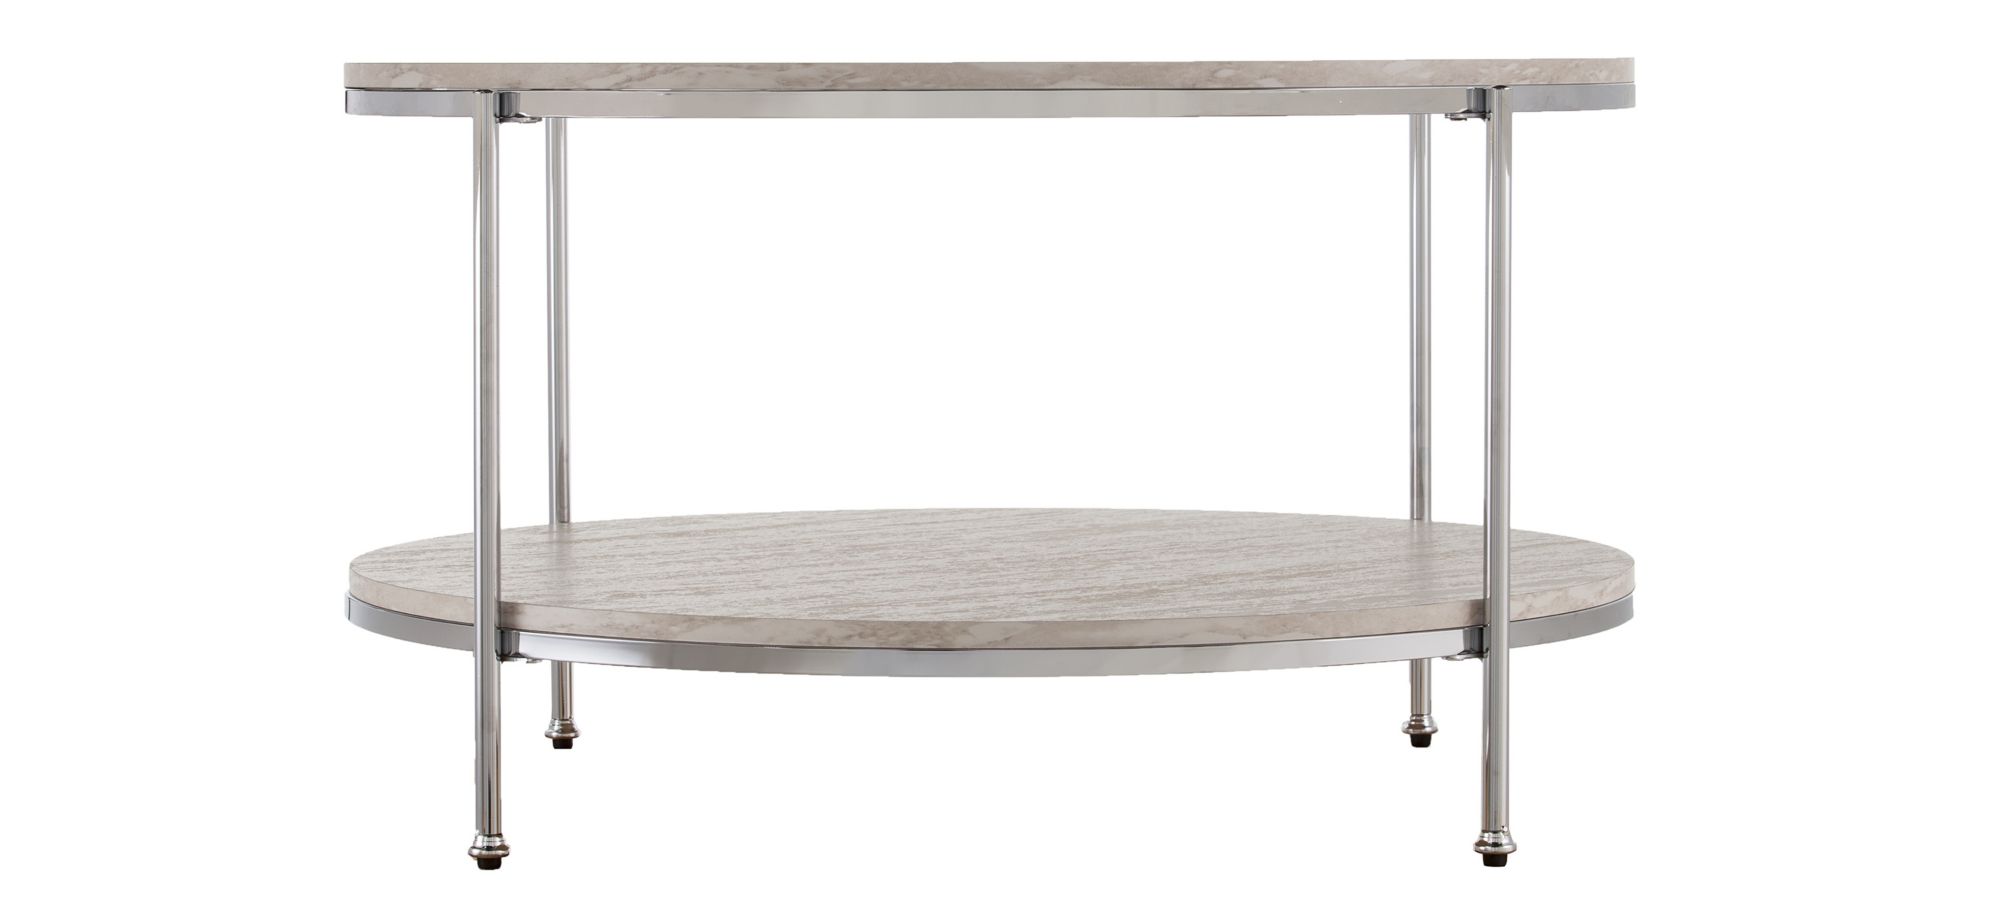 Camille Round Faux Marble Cocktail Table in Chrome by SEI Furniture